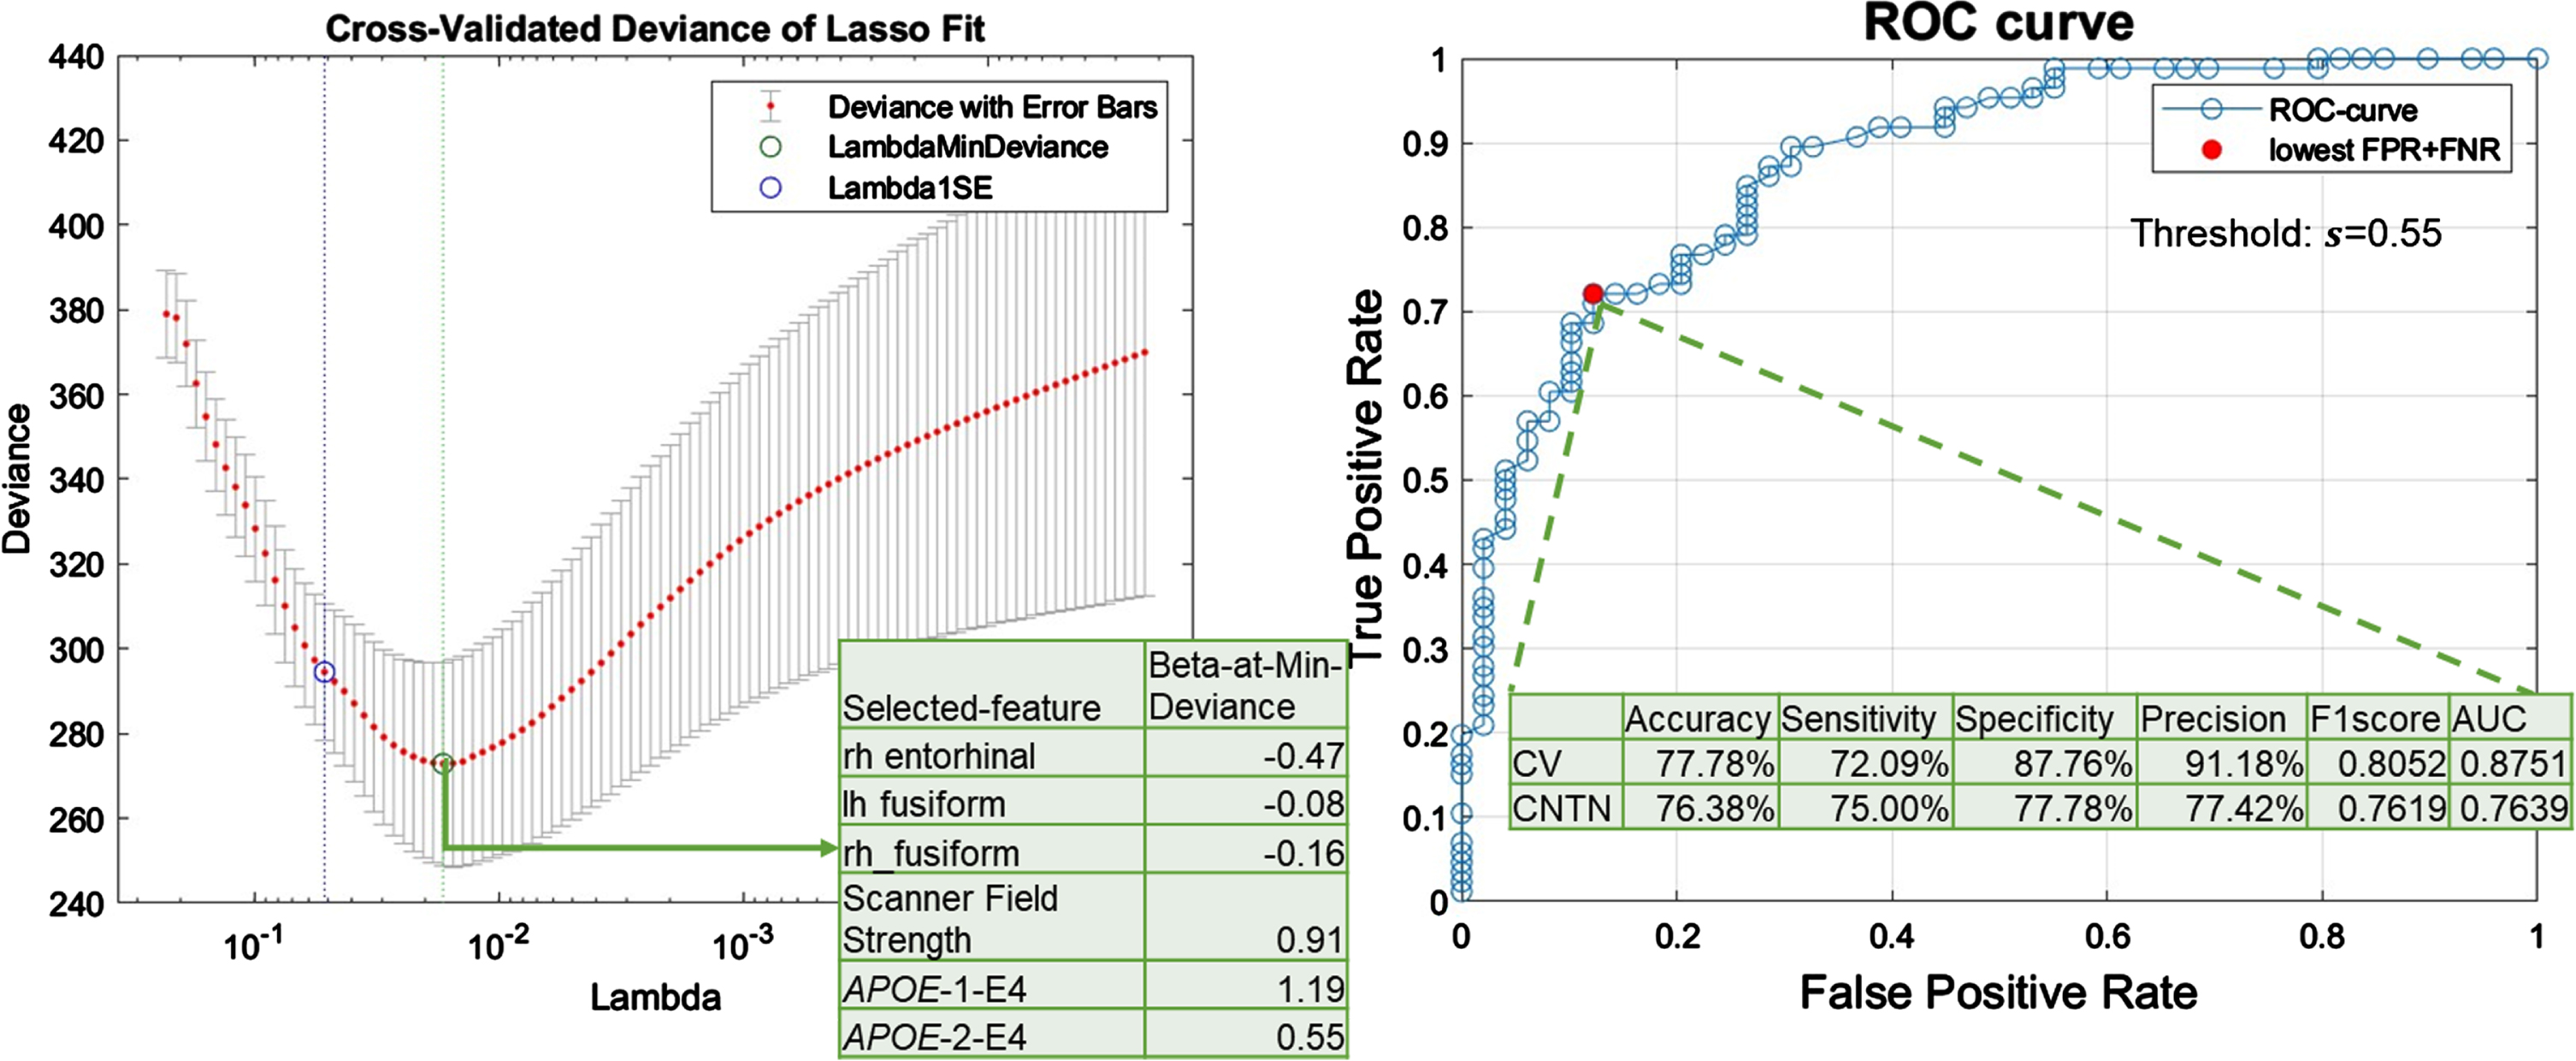 LASSO-logistic regression results. A) Feature selection results. Cross-validated (CV) deviance of LASSO-logistic-regression models, trained with NACC participants to classify the presence or absence of severe AD neuropathological status (ADNC3 versus ADNC0&1), as a function of regularization strength in LASSO (lambda). The green circle corresponds to the selected model with a minimum CV deviance. The intersect table lists the beta coefficient in the logistic regression model of each selected feature. B) Model performance with selected features. ROC curve for CV performance of the reduced logistic regression model trained with 6 selected features to classify ADNC3 versus ADNC0&1. The red filled dot indicates the point with the lowest total false rate (false positive rate (FPR) + false negative rate (FNR)). The corresponding threshold s = 0.55 is used to binarize the predicted probability in assigning participants to the ADNC3 group. Using this model with this threshold, the intersect table shows the CV-performance with NACC participants to classify AD neuropathological status (ADNC3 versus ADNC0&1) and external testing results with CNTN participants to classify amyloid positivity status (amyloid positive versus amyloid negative).